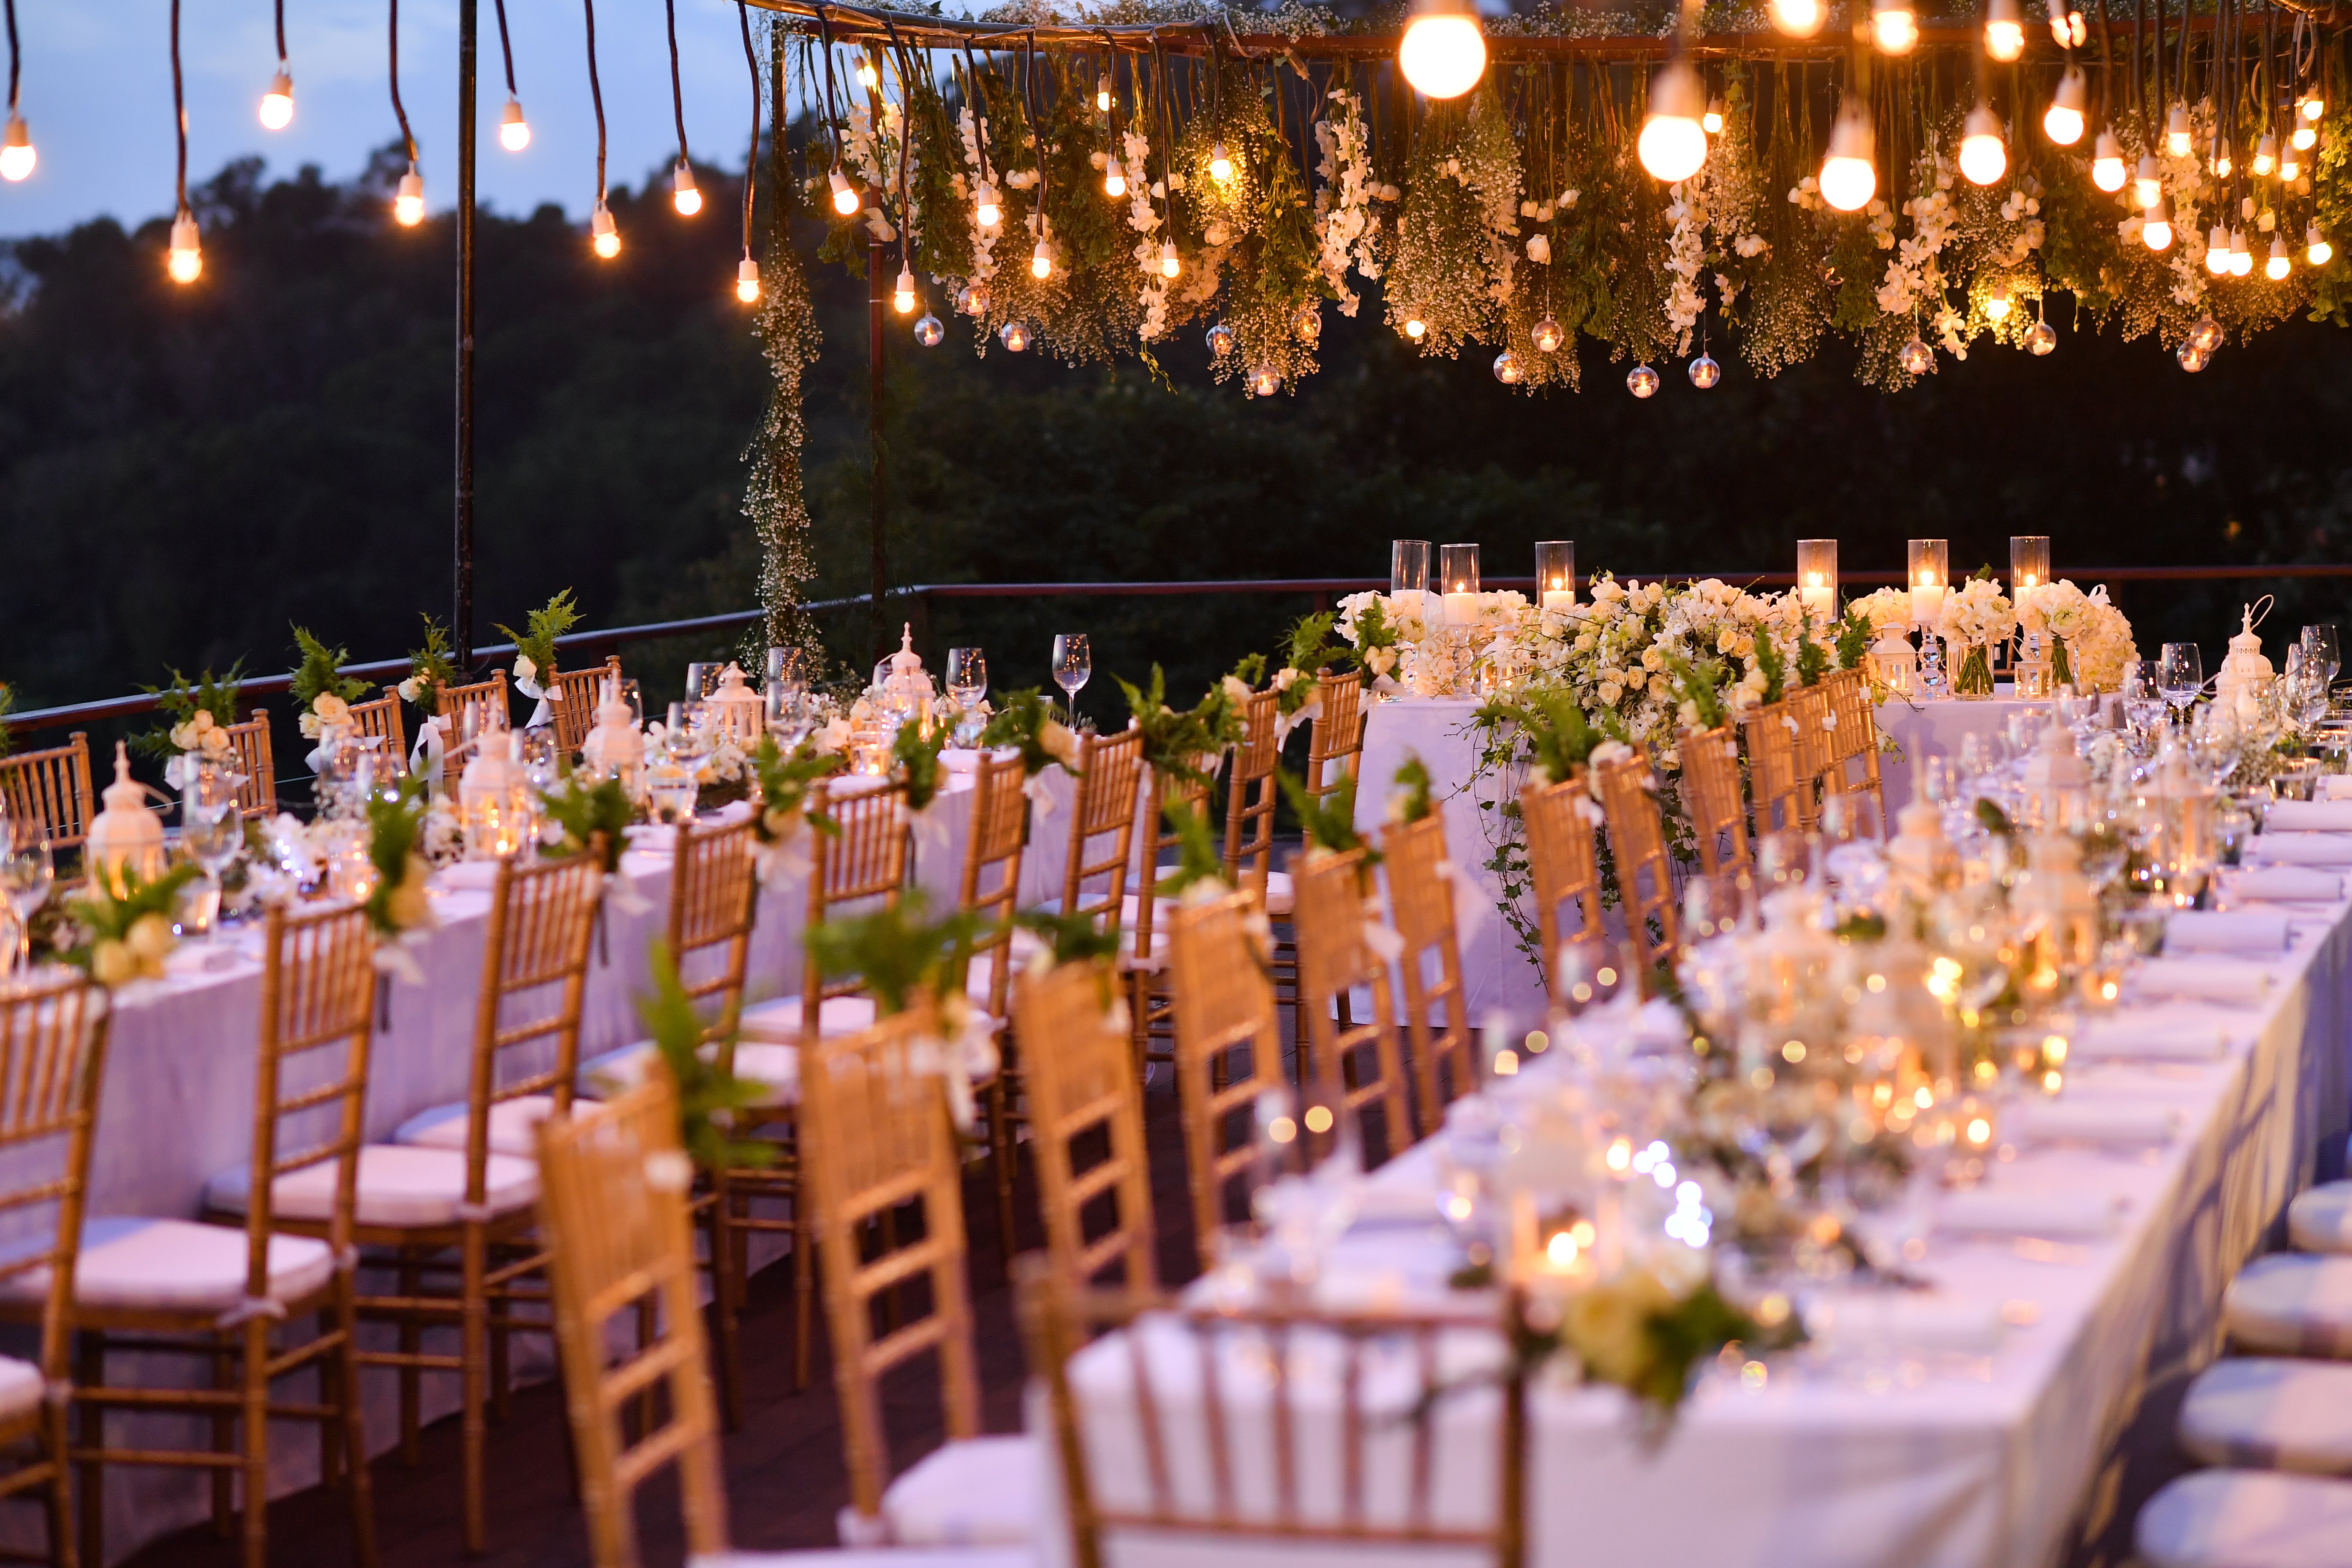 Dinner tables for the wedding guests | Photo: Shutterstock 